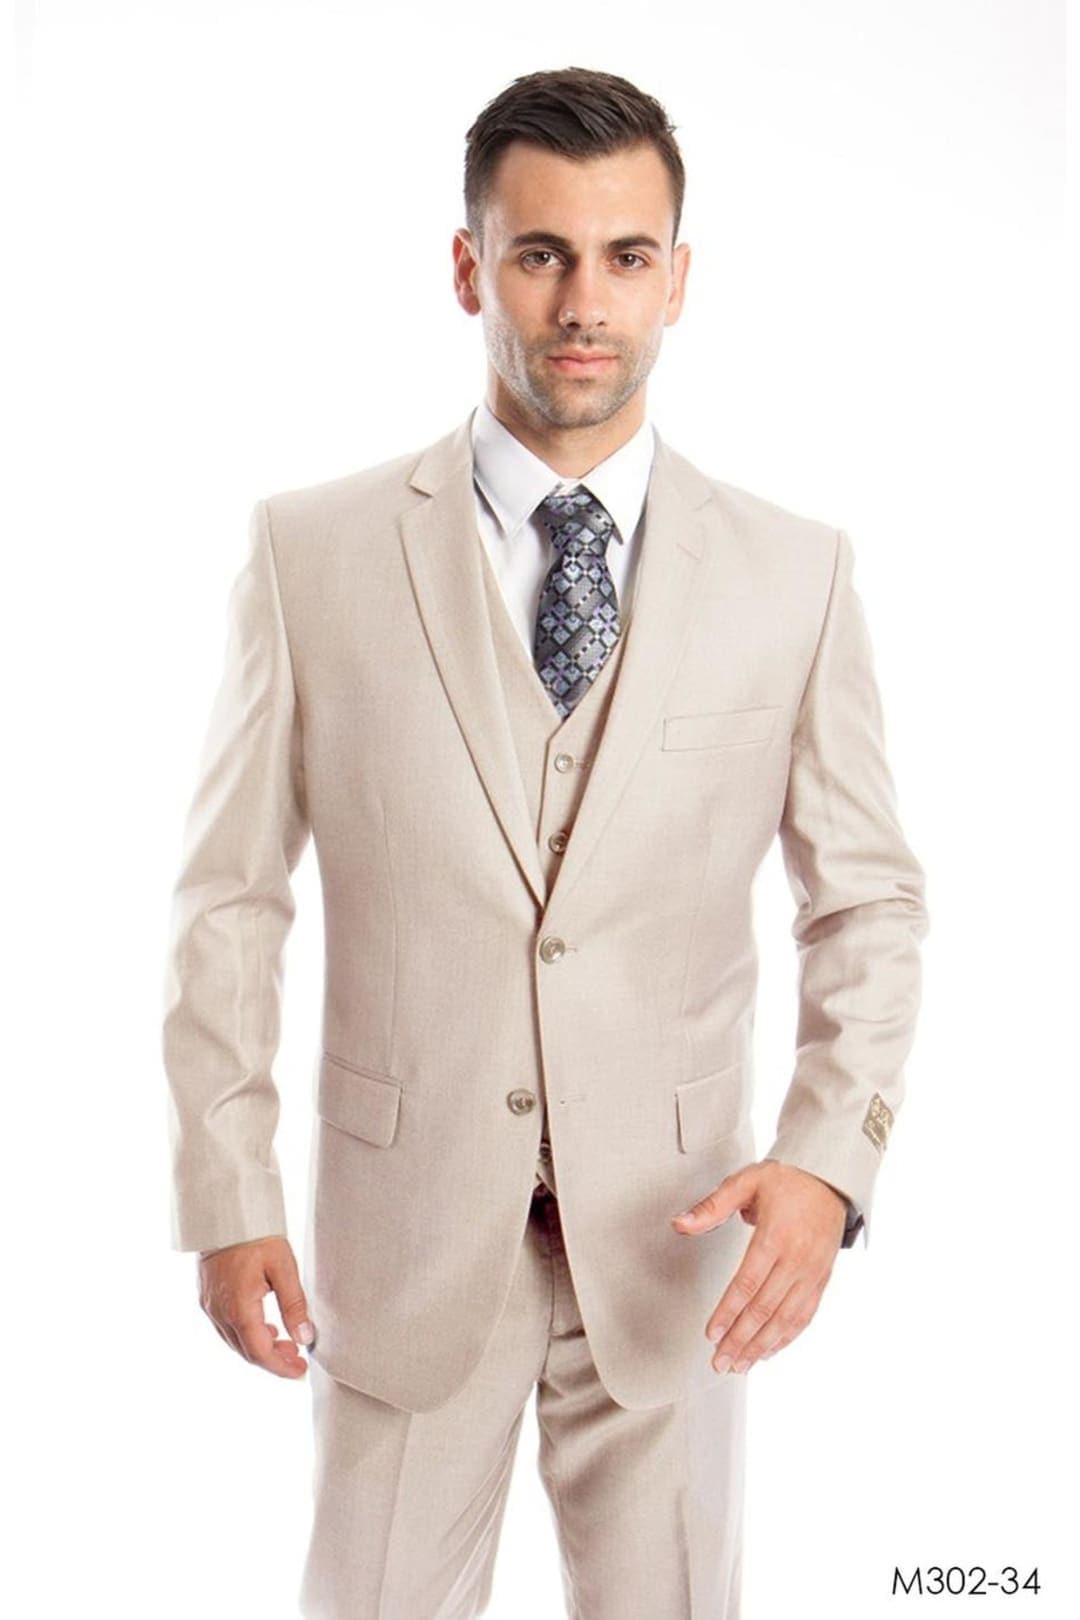 Find Stylish White Suits For Men At Best Prices– SAINLY